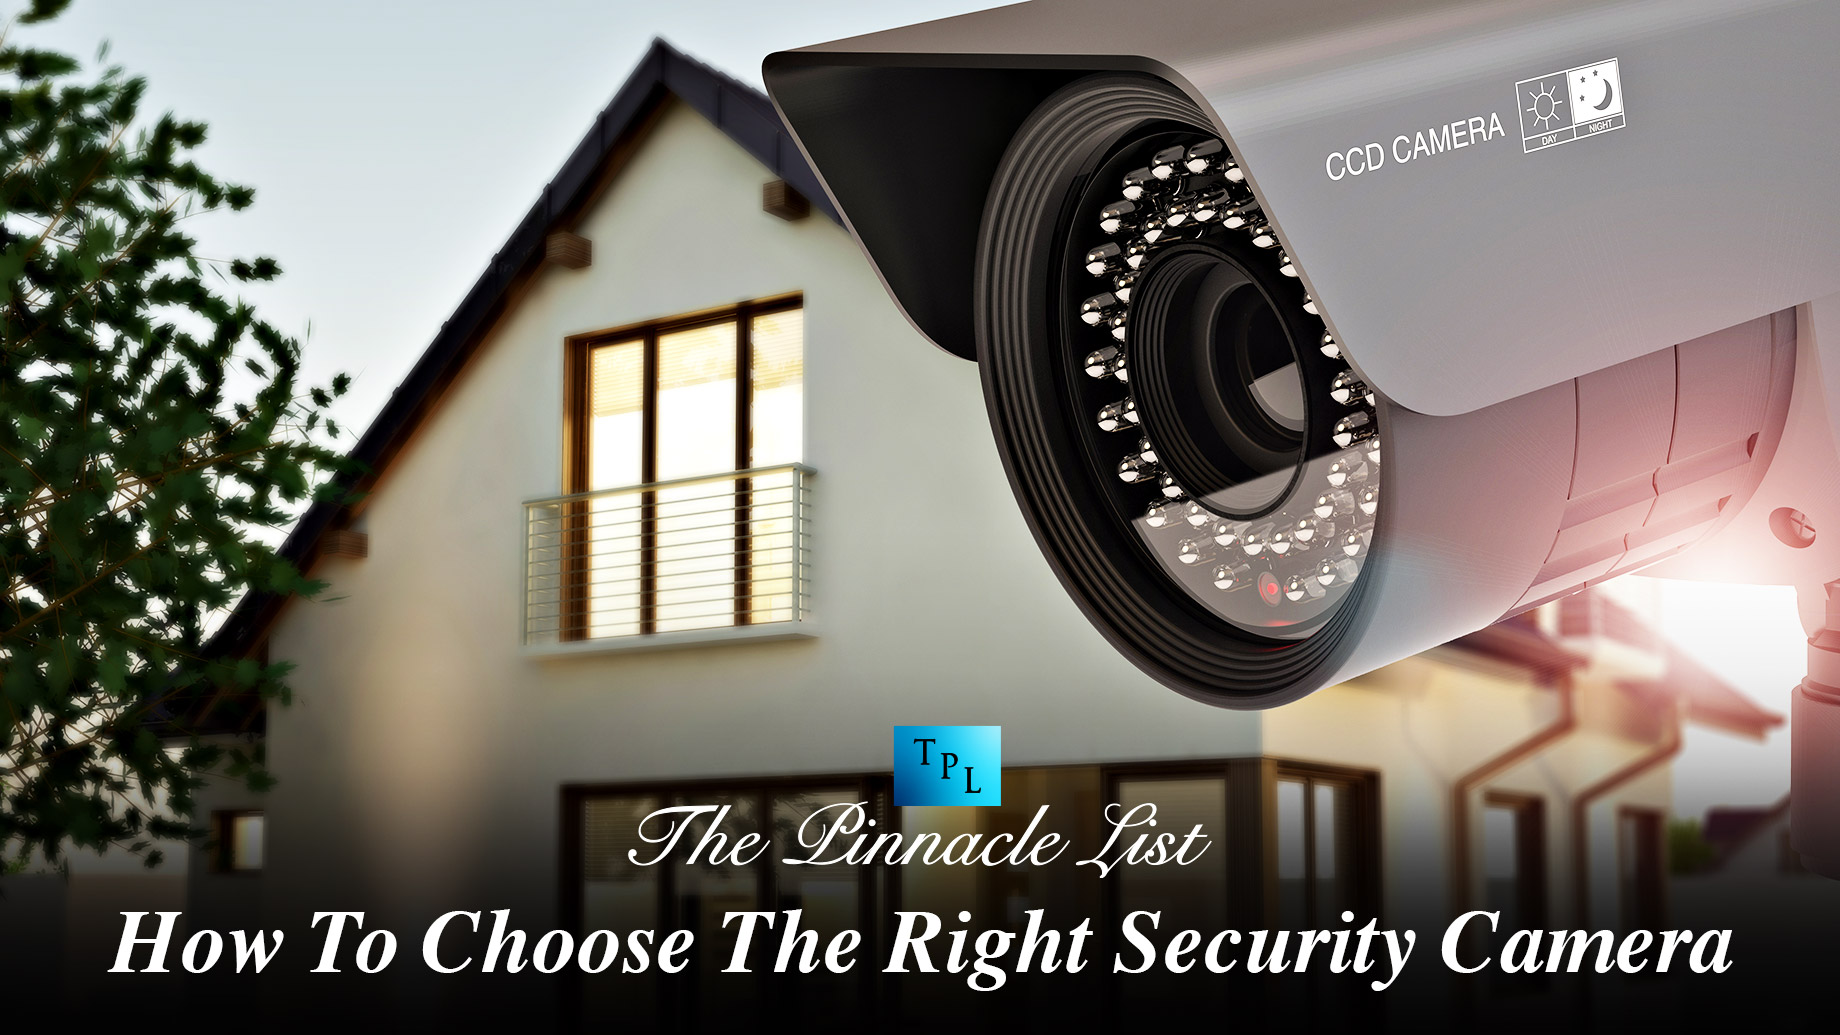 How To Choose The Right Security Camera